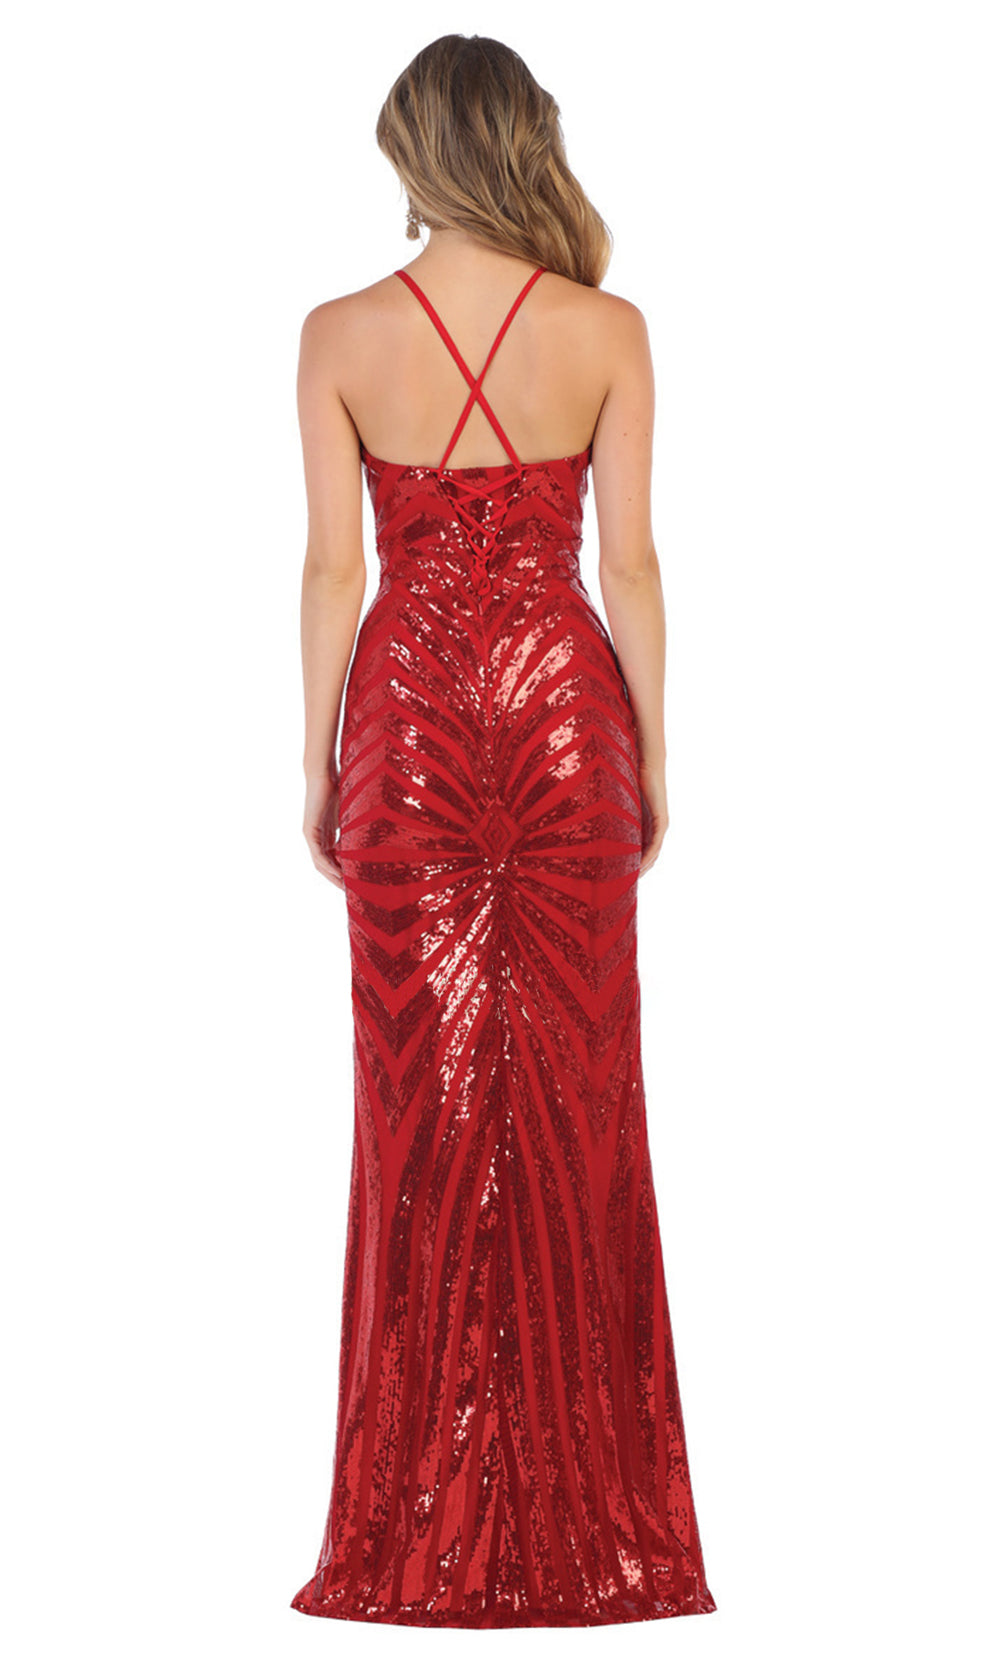 May Queen - RQ7695 Embellished V Neck Sheath Dress In Red